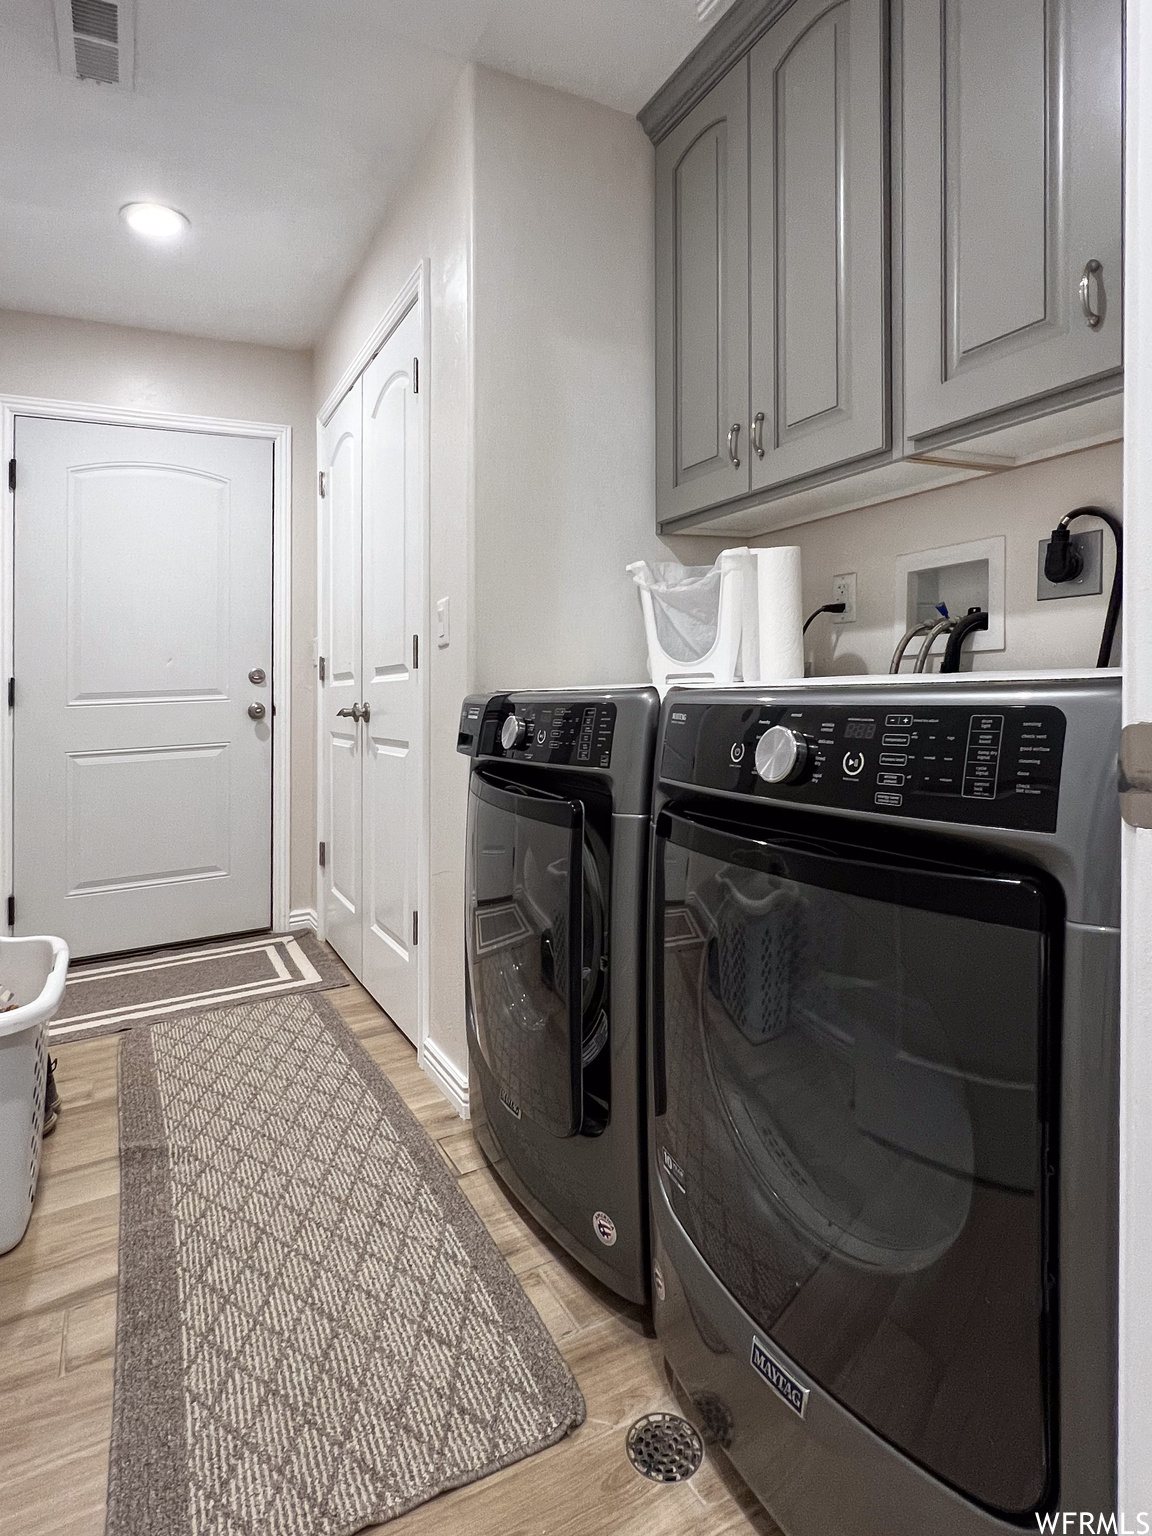 Washroom featuring separate washer and dryer